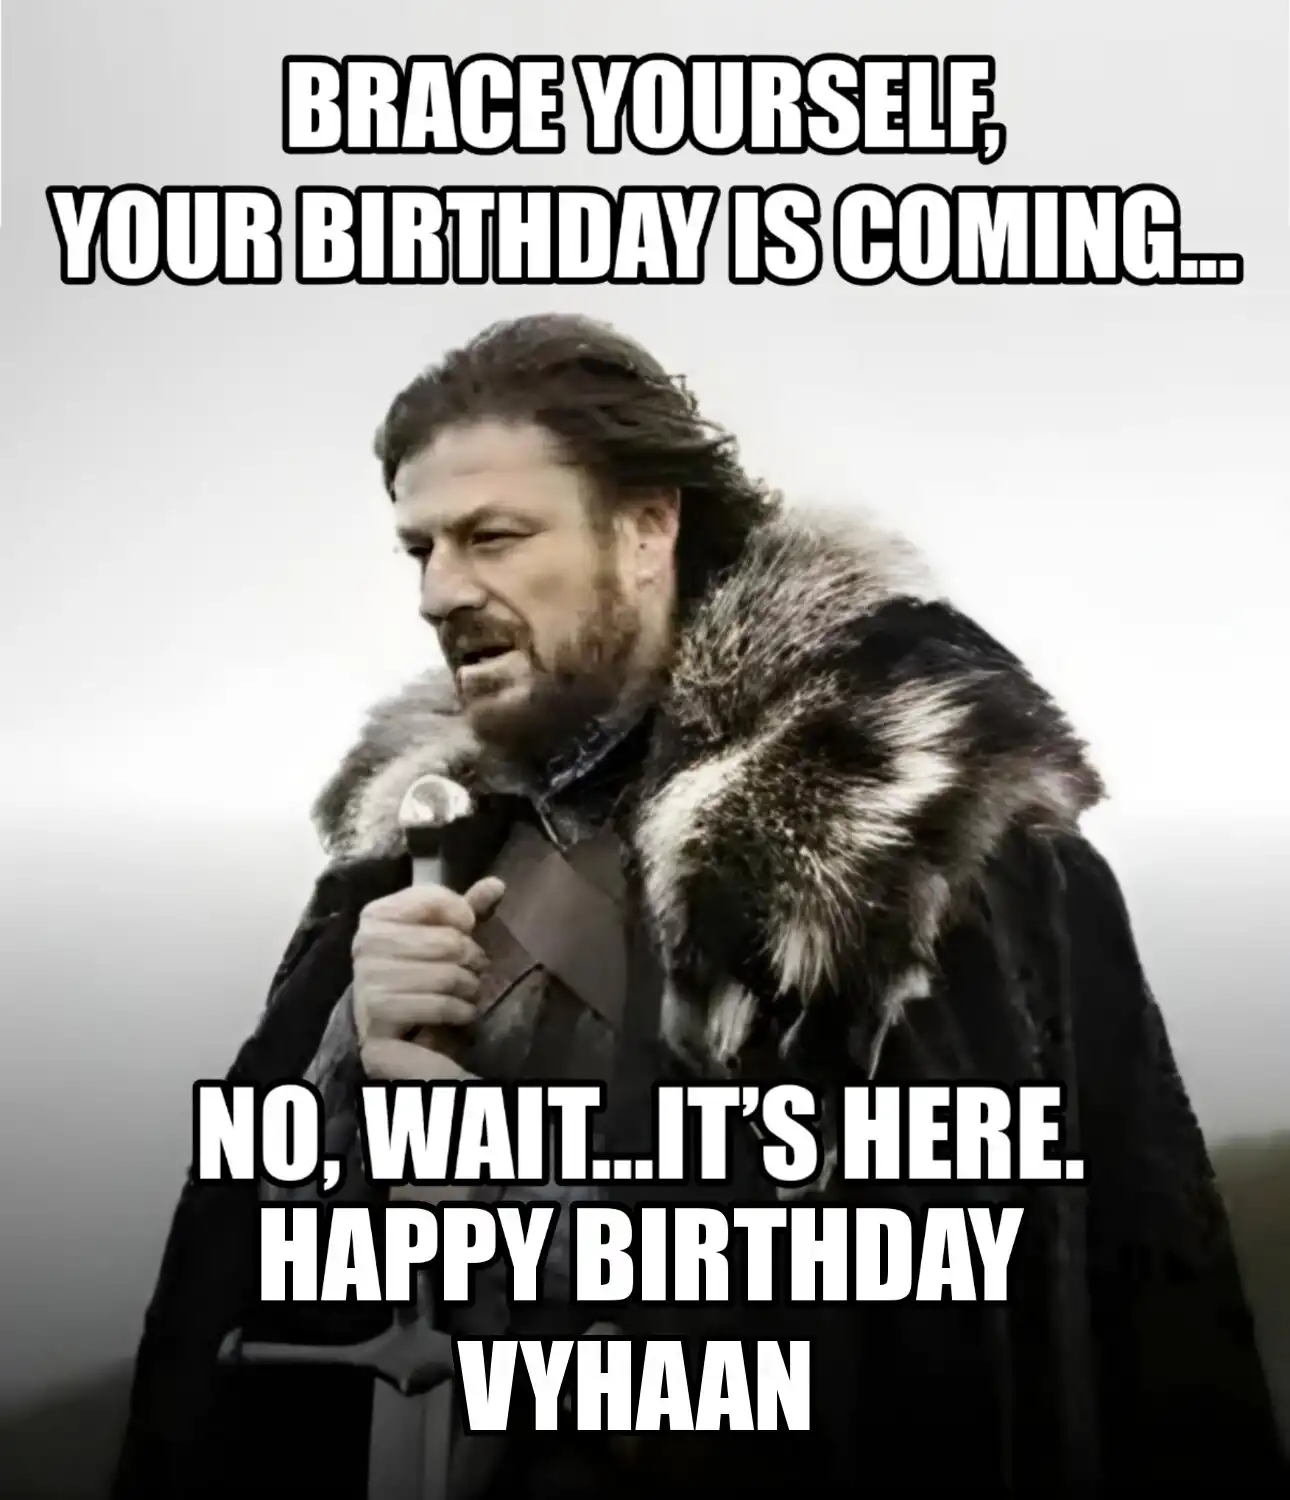 Happy Birthday Vyhaan Brace Yourself Your Birthday Is Coming Meme